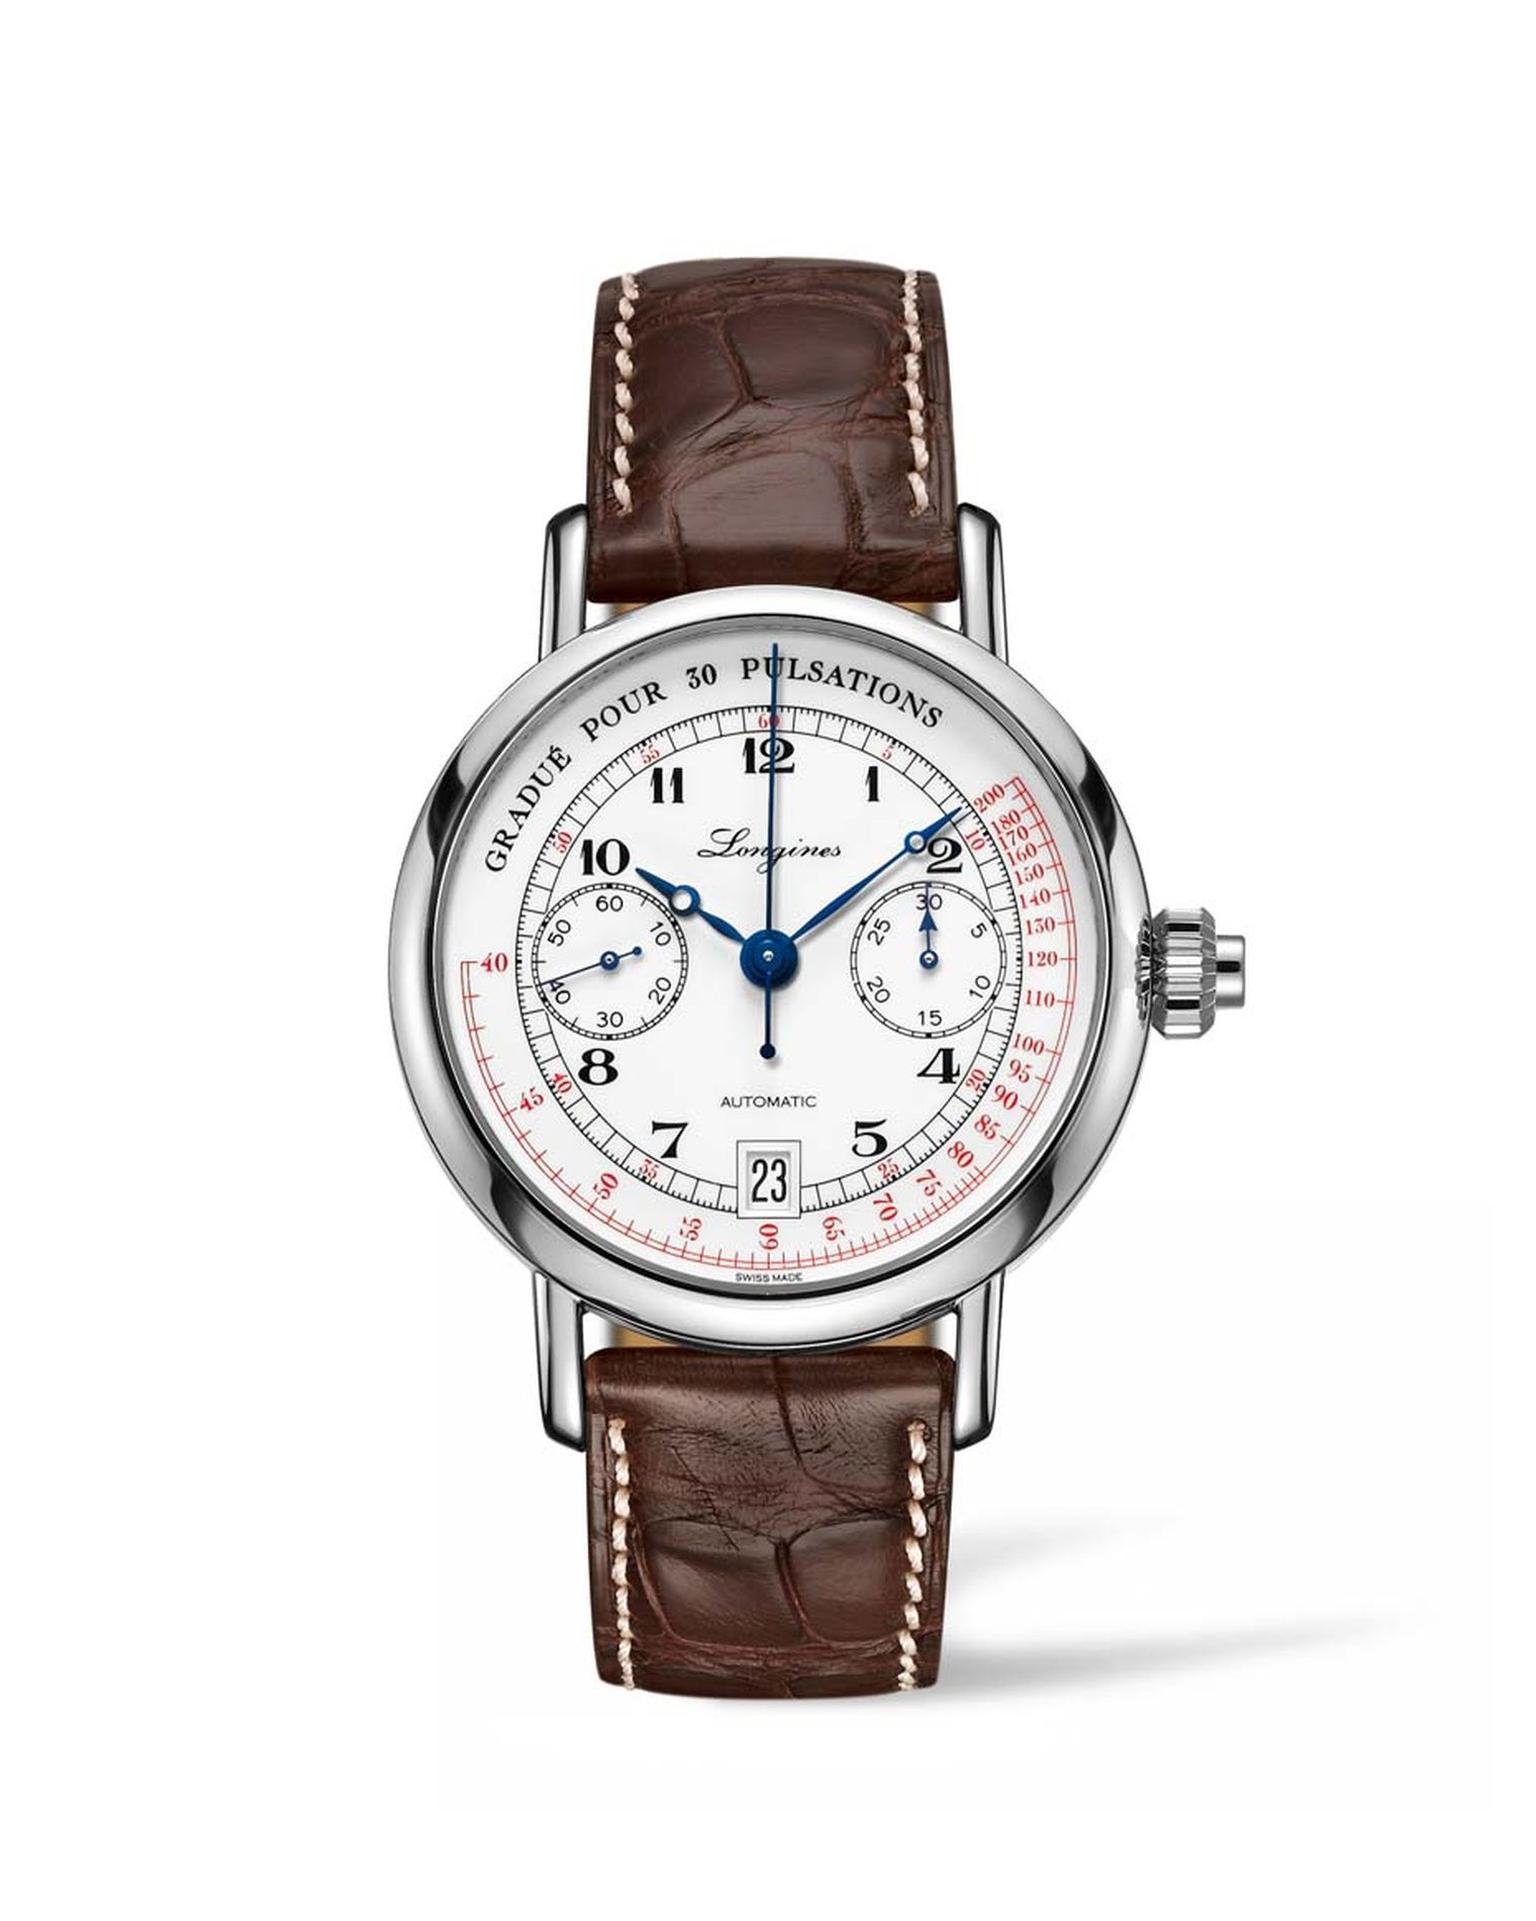 The new Longines Pulsometer Chronograph has an appealing vintage spirit thanks to its white enamel dial and painted numerals. The pulsometer scale is highlighted in red on the periphery of the dial of this 40mm stainless steel model.